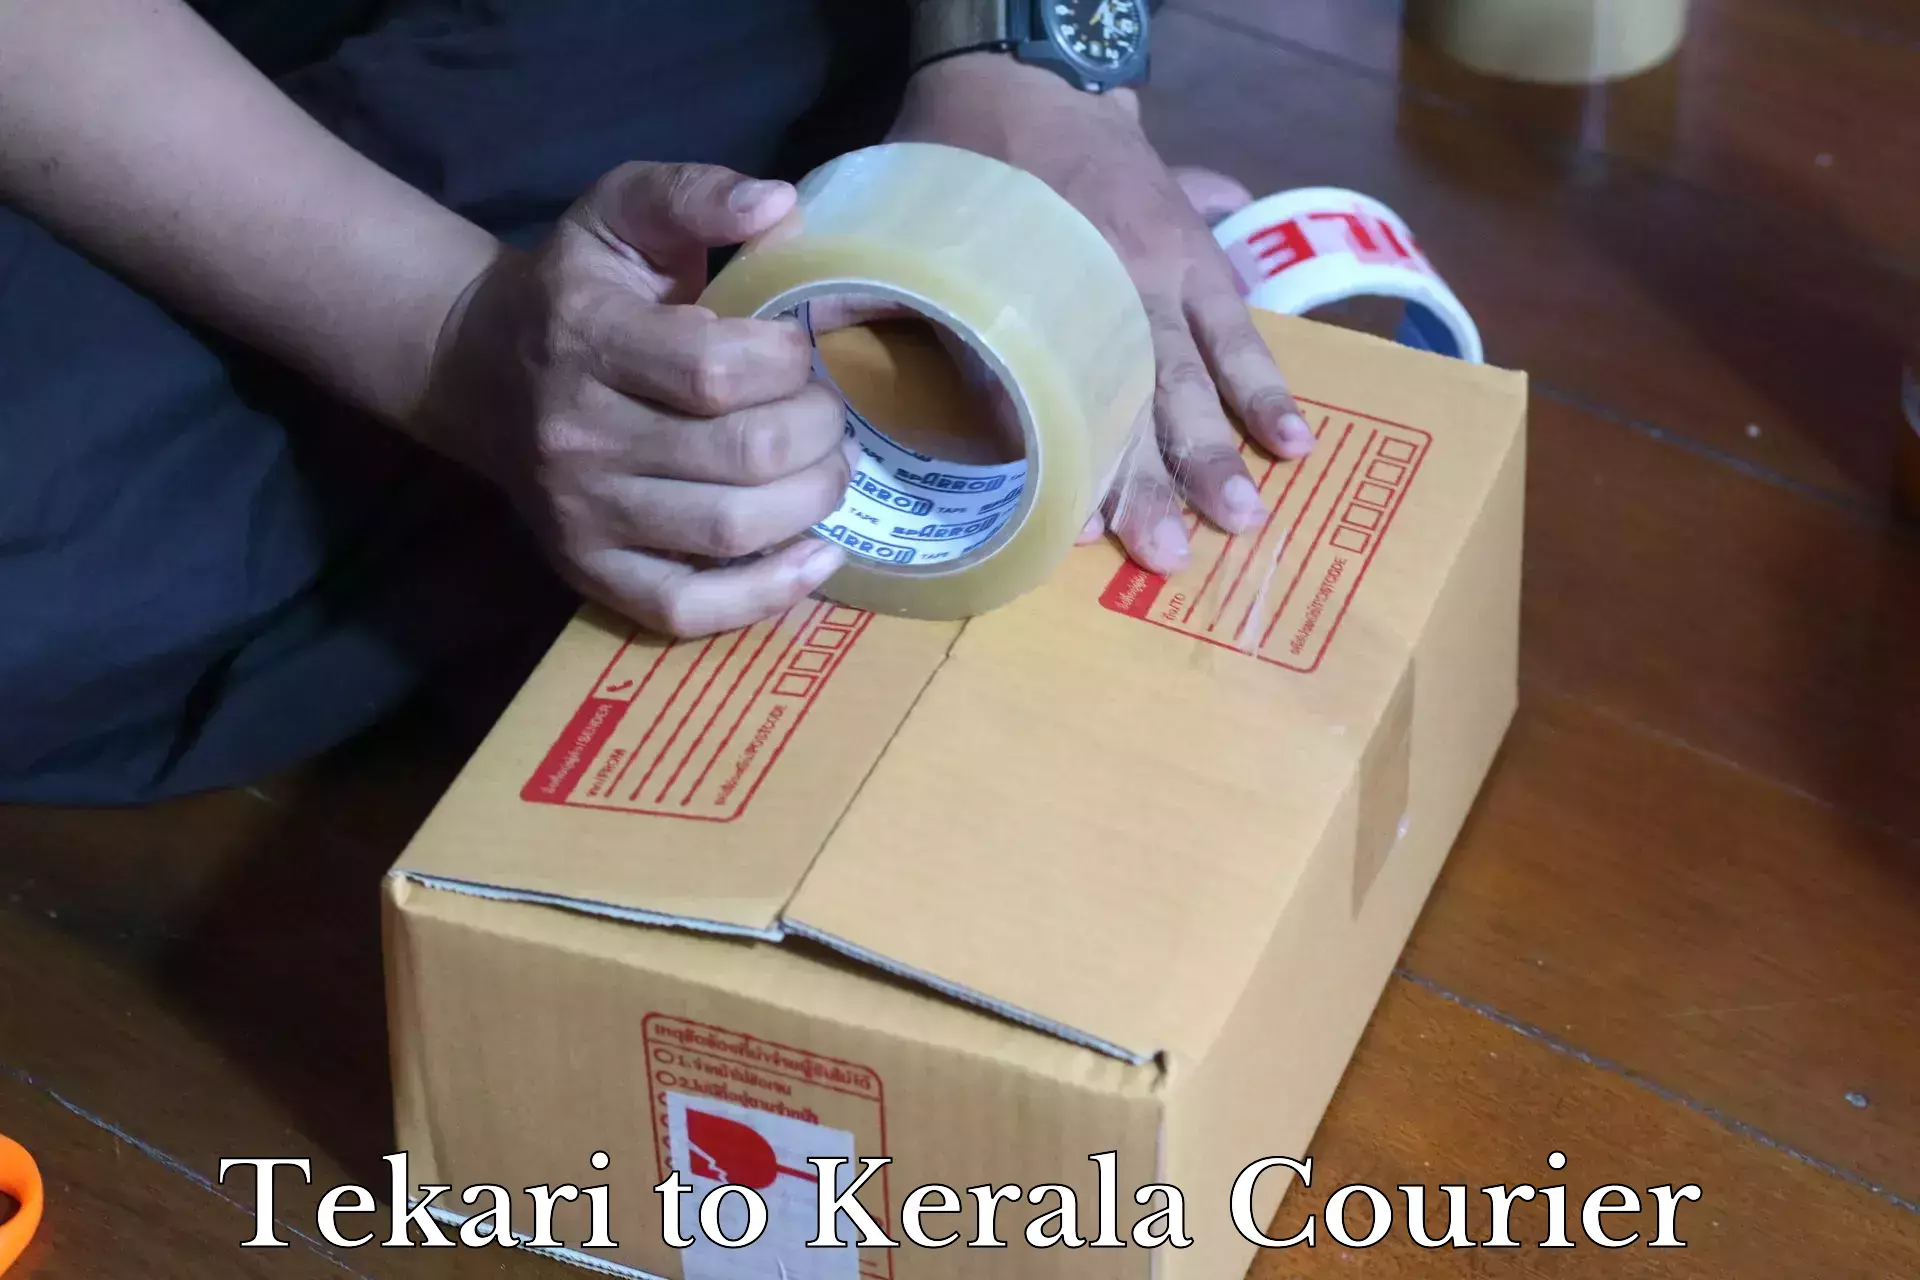 Personal parcel delivery Tekari to Kochi